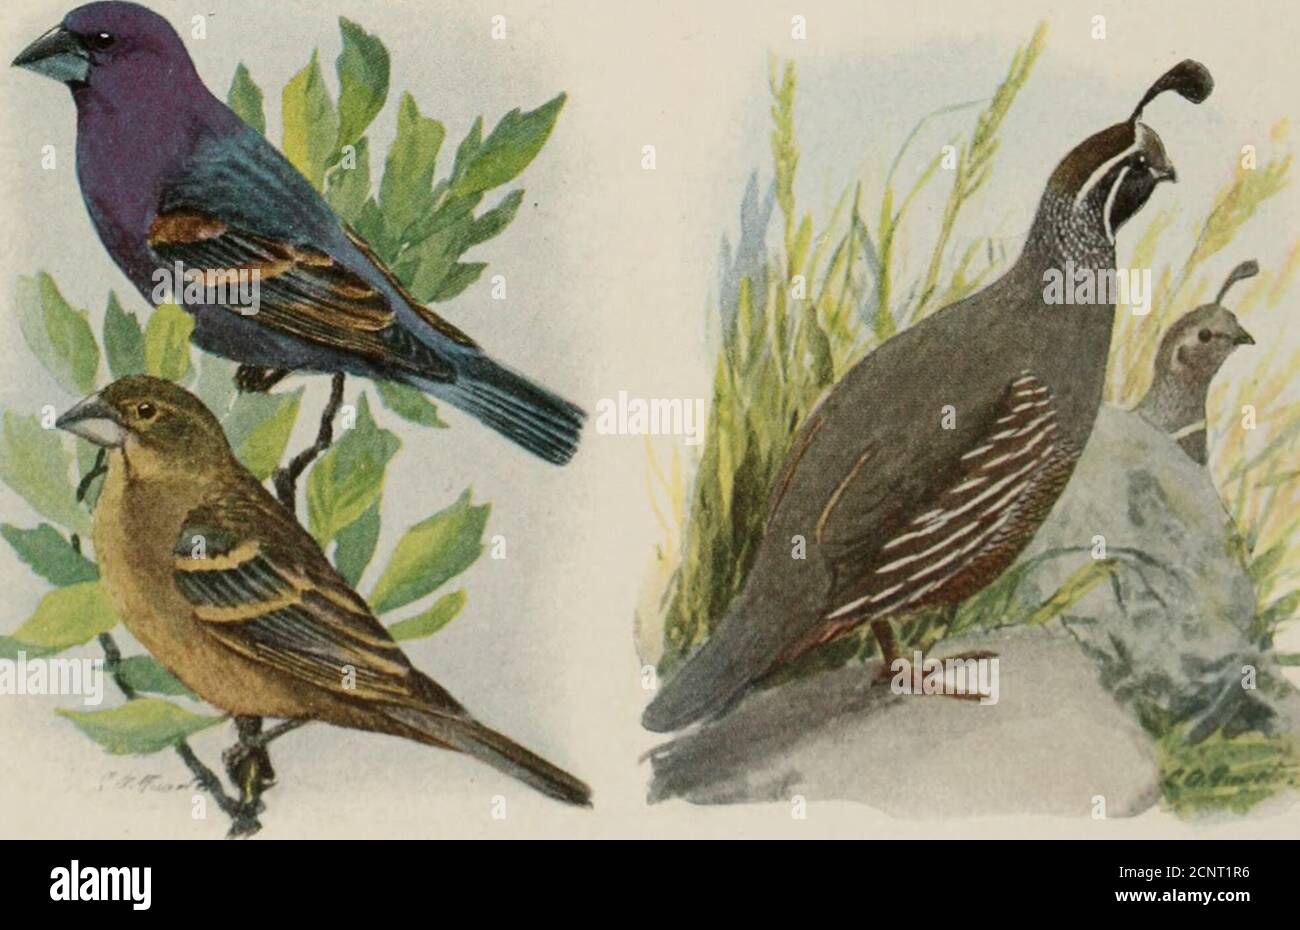 . The book of birds; common birds of town and country and American game birds . Vksper SparuowBlue Grosbkak Male, upper; female, lower Cardinal Male, upper; female, lowerCalhorma Quail 23 BREWERS BLACKBIRD (Euphaguscyanocephalus) Length, lo inclies. Its glossy purijlisli headdistinguishes it from other l)hicklHrds that donot show in fliglit a trougli-shapcd tail. Range : Breeds in the West, cast to Texas,Kansas, and Minnesota, and itorth to southernCanada: winters over most of the UnitedStates hrecding range, south to Guatemala. Habits and economic status: Very numerousin the West and in fall Stock Photo